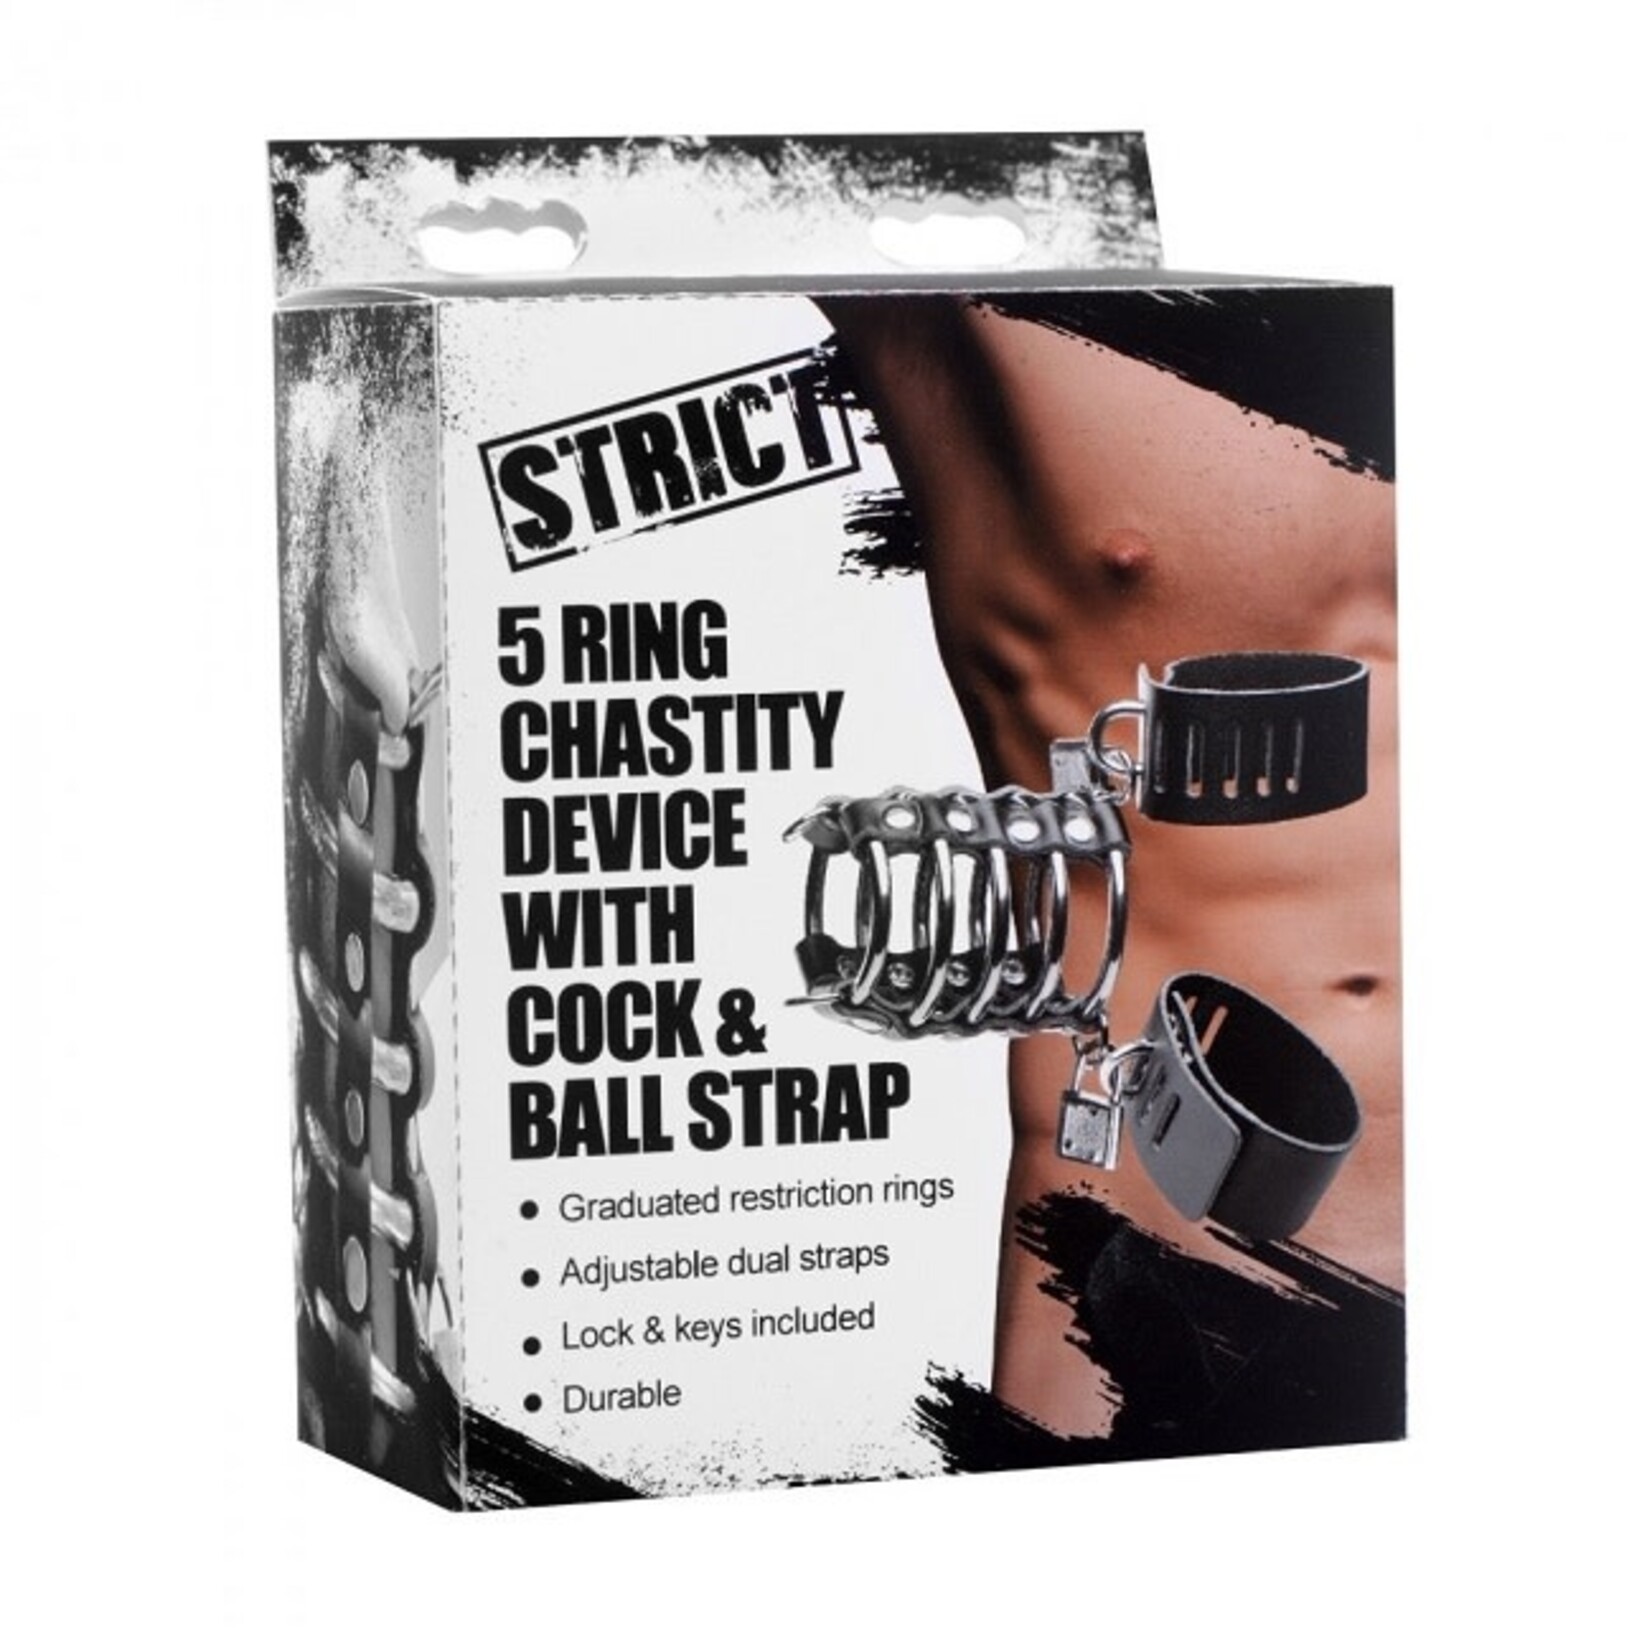 Strict Strict 5 Ring Chastity Device with Cock and Ball Strap